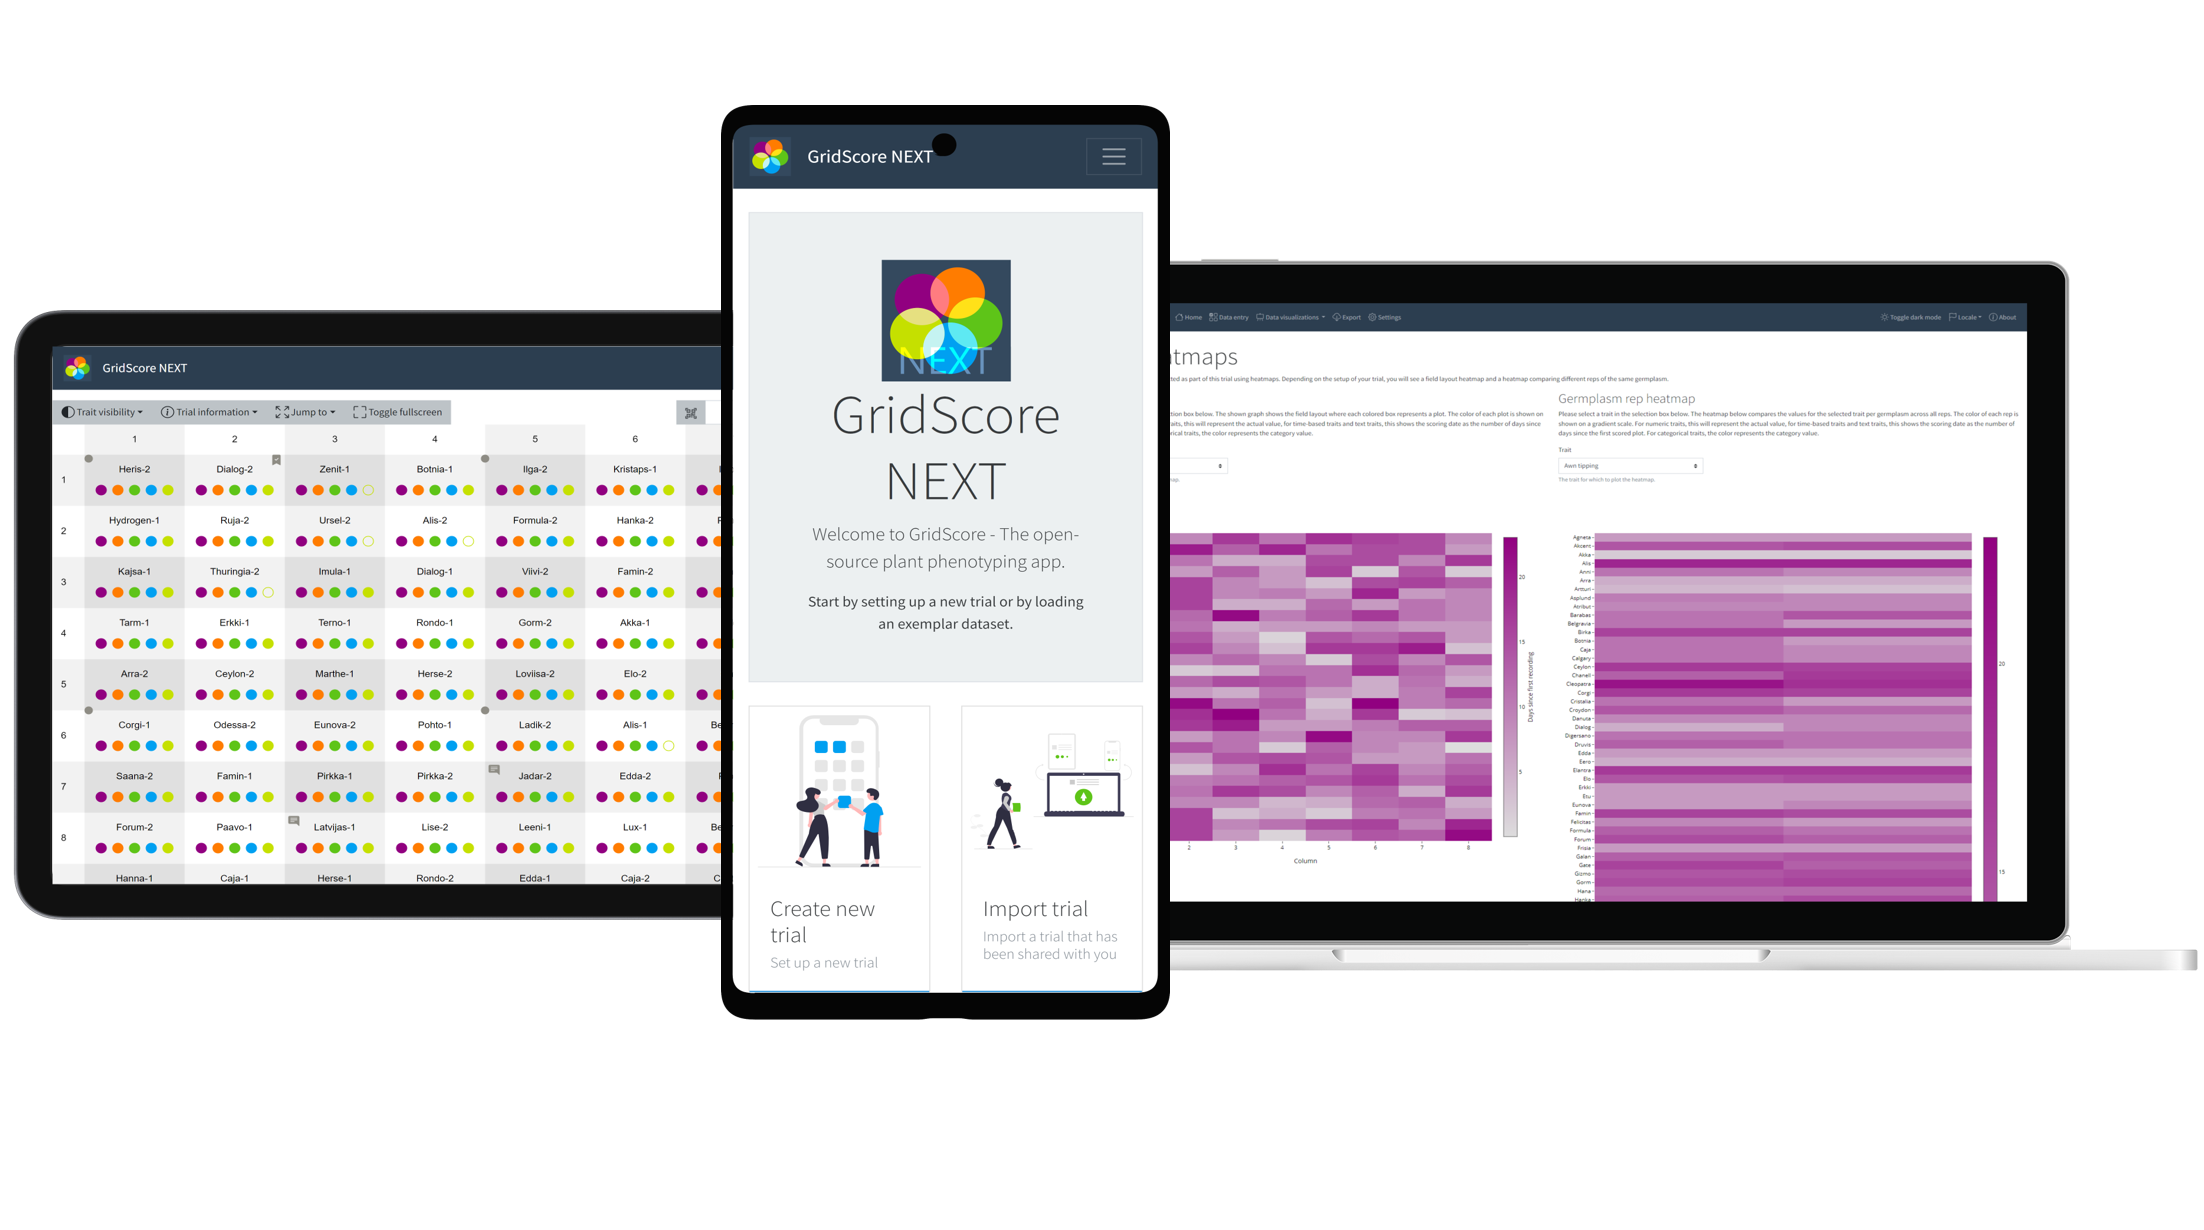 GridScore running on various devices